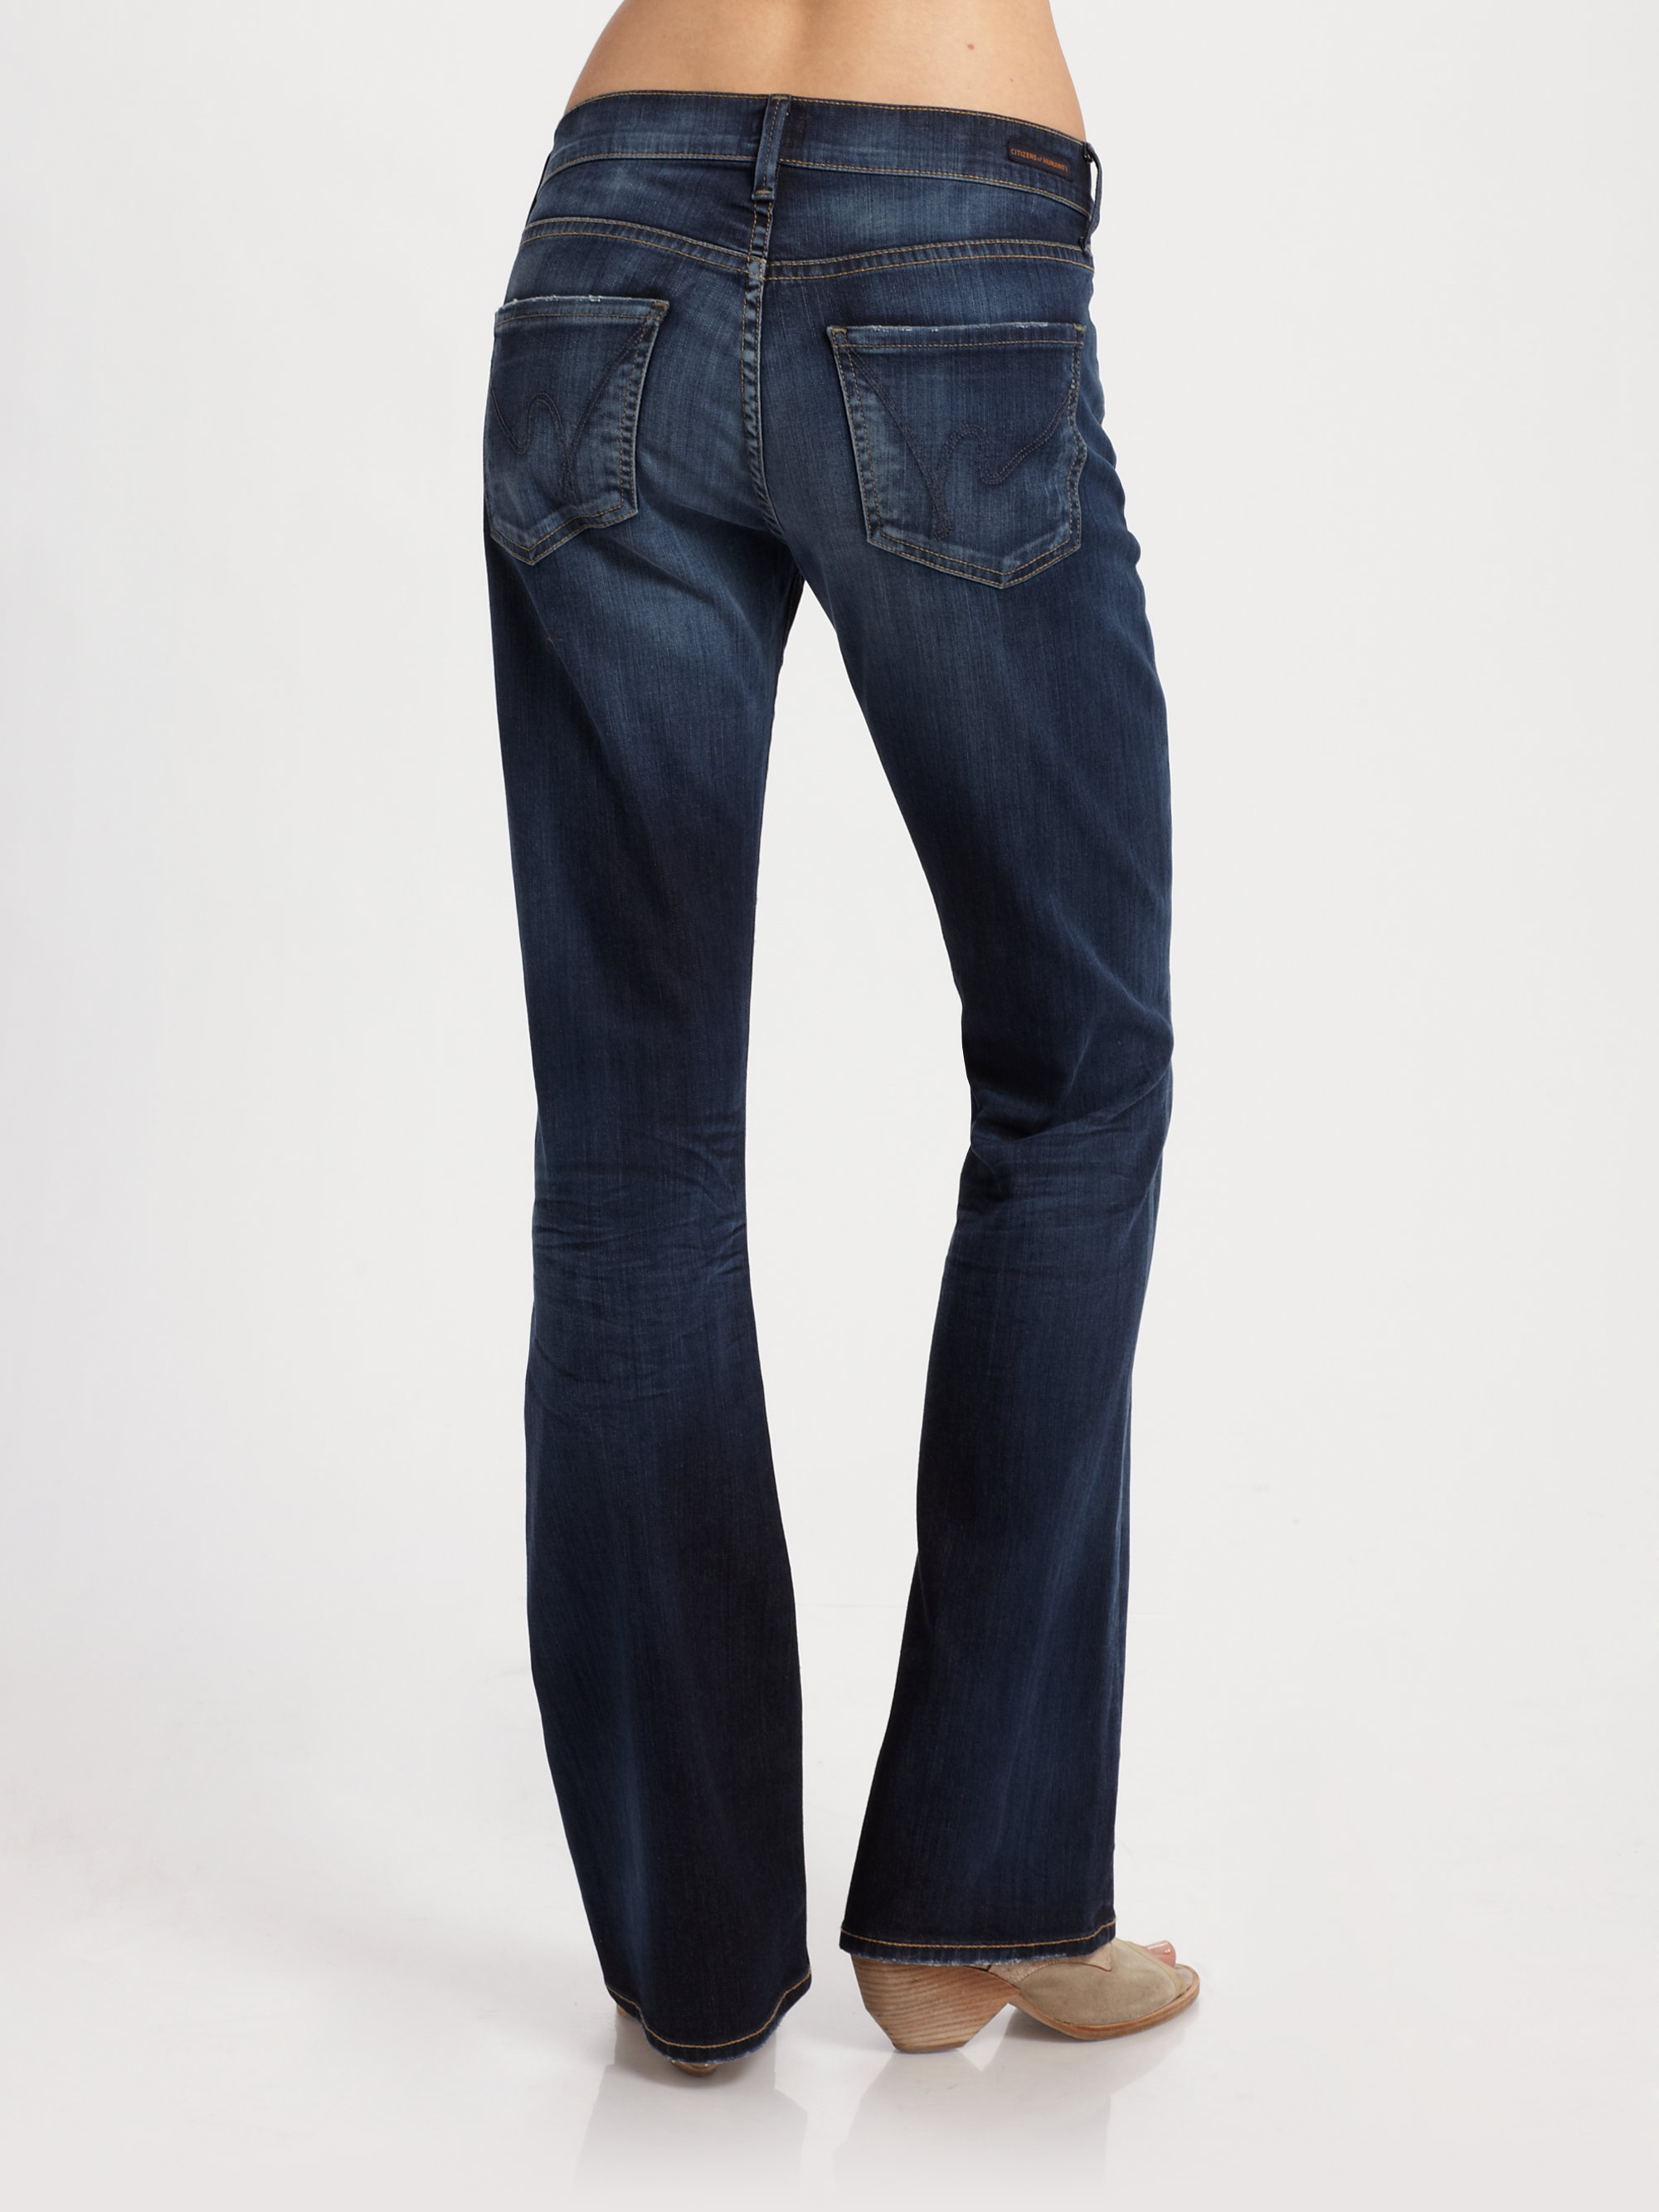 Citizens of Humanity Dita Petite Bootcut Jeans in Blue | Lyst